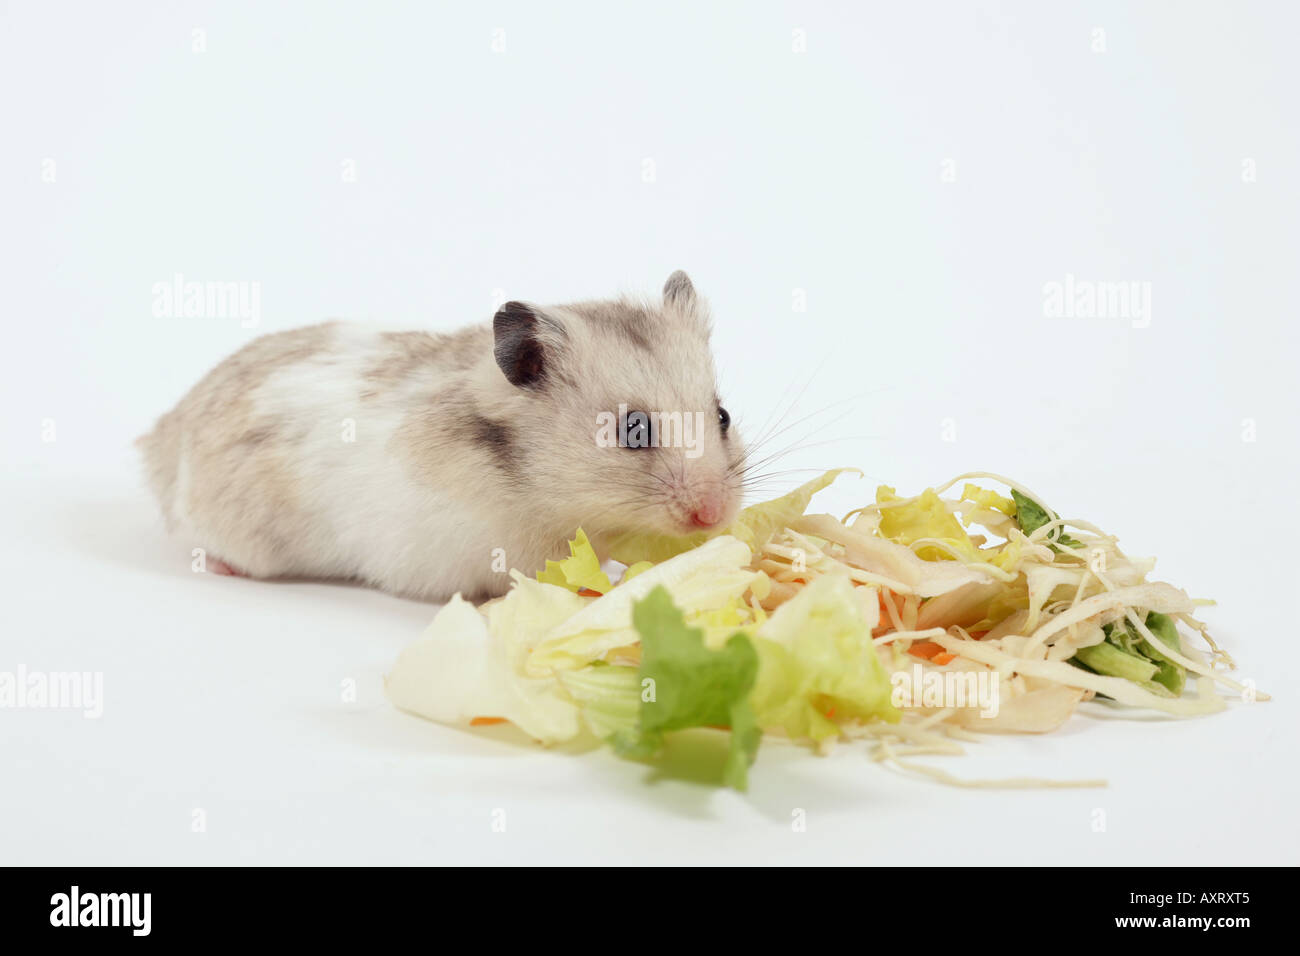 Hamster on white with food Stock Photo